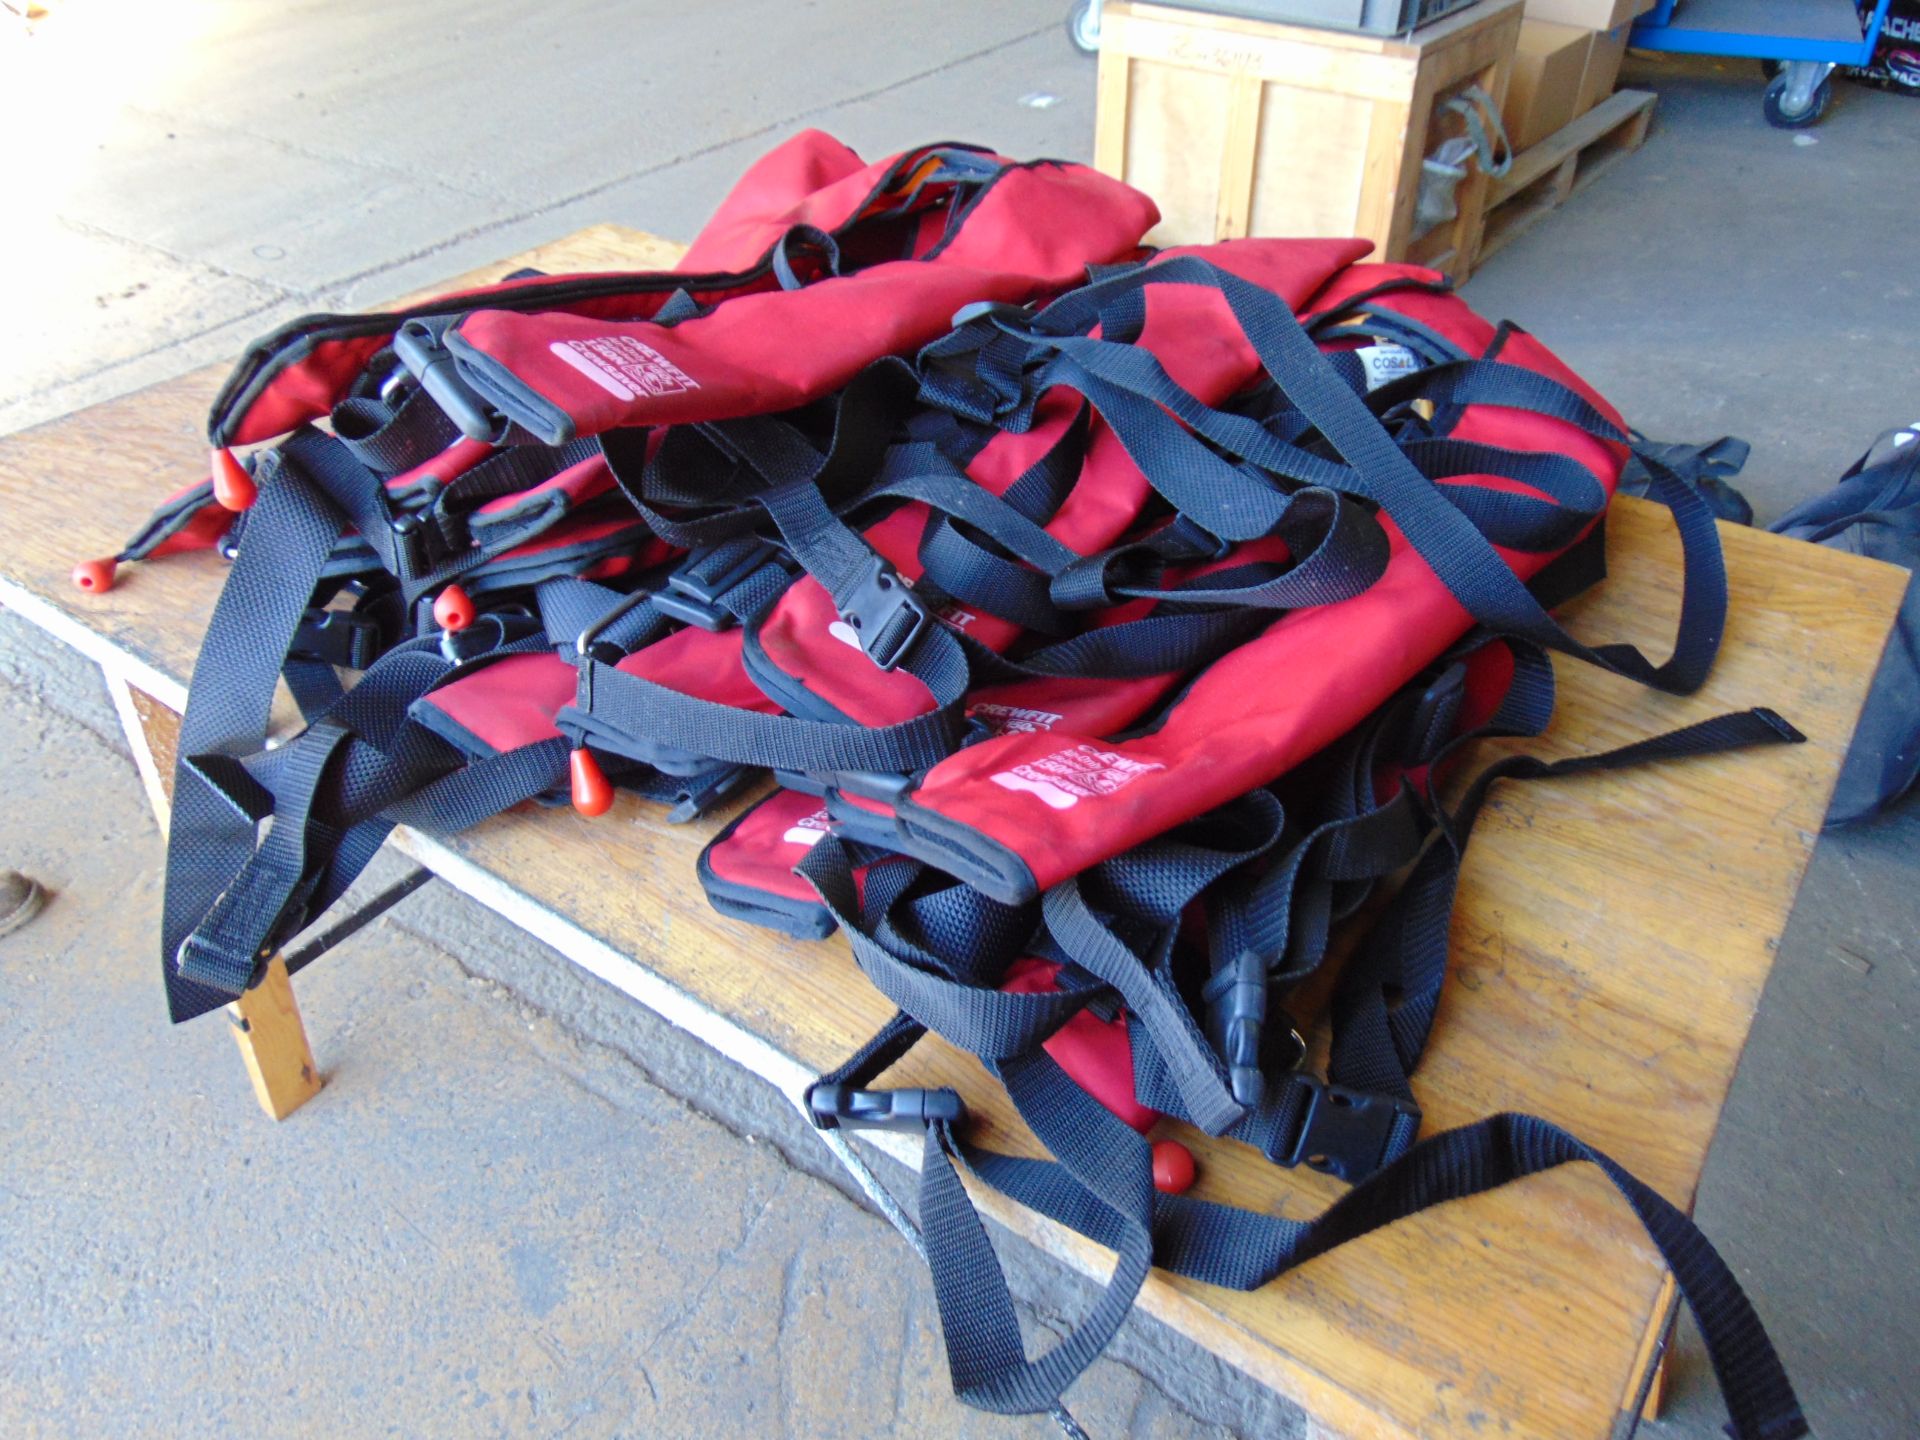 6 x Crew Saver 150 N Life Jackets from UK Fire / Rescue Services - Image 5 of 6